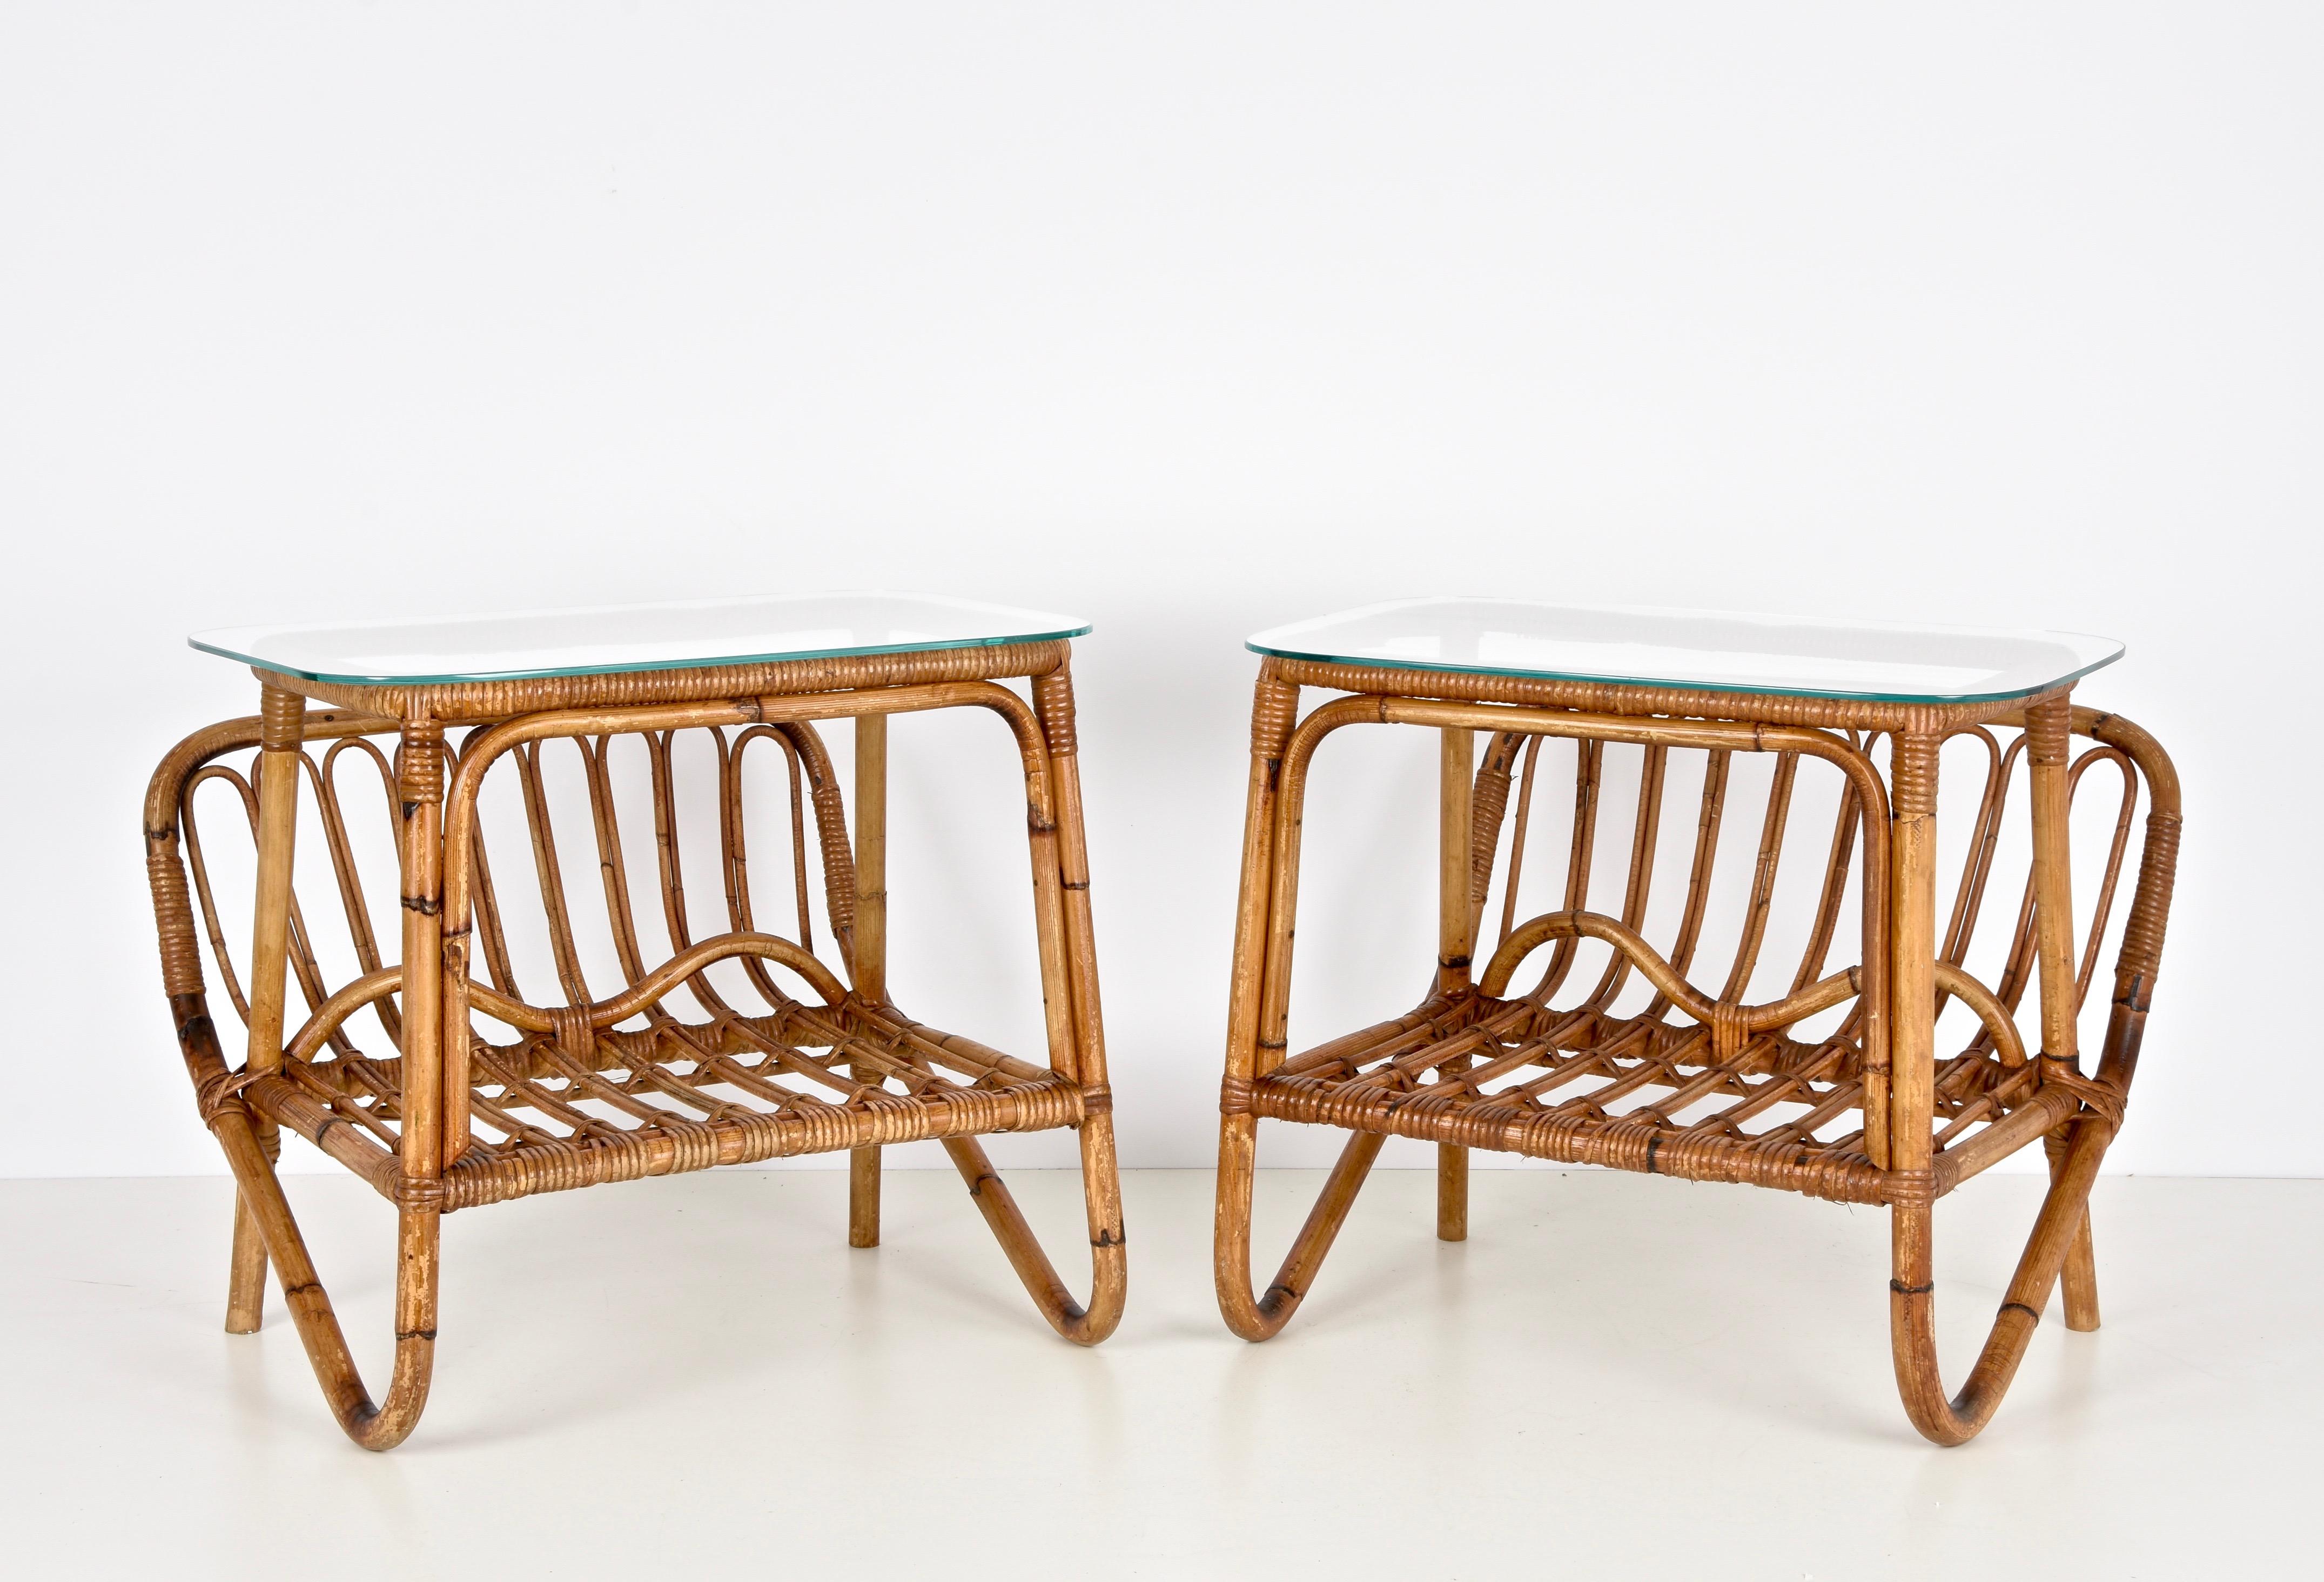 Amazing pair of midcentury bamboo magazine tack coffee tables with a glass shelf. This wonderful set was designed in Italy during the 1960s and was produced by Casa del Giunco Ciarralli in Rome.

You are going to love this fantastic set as the